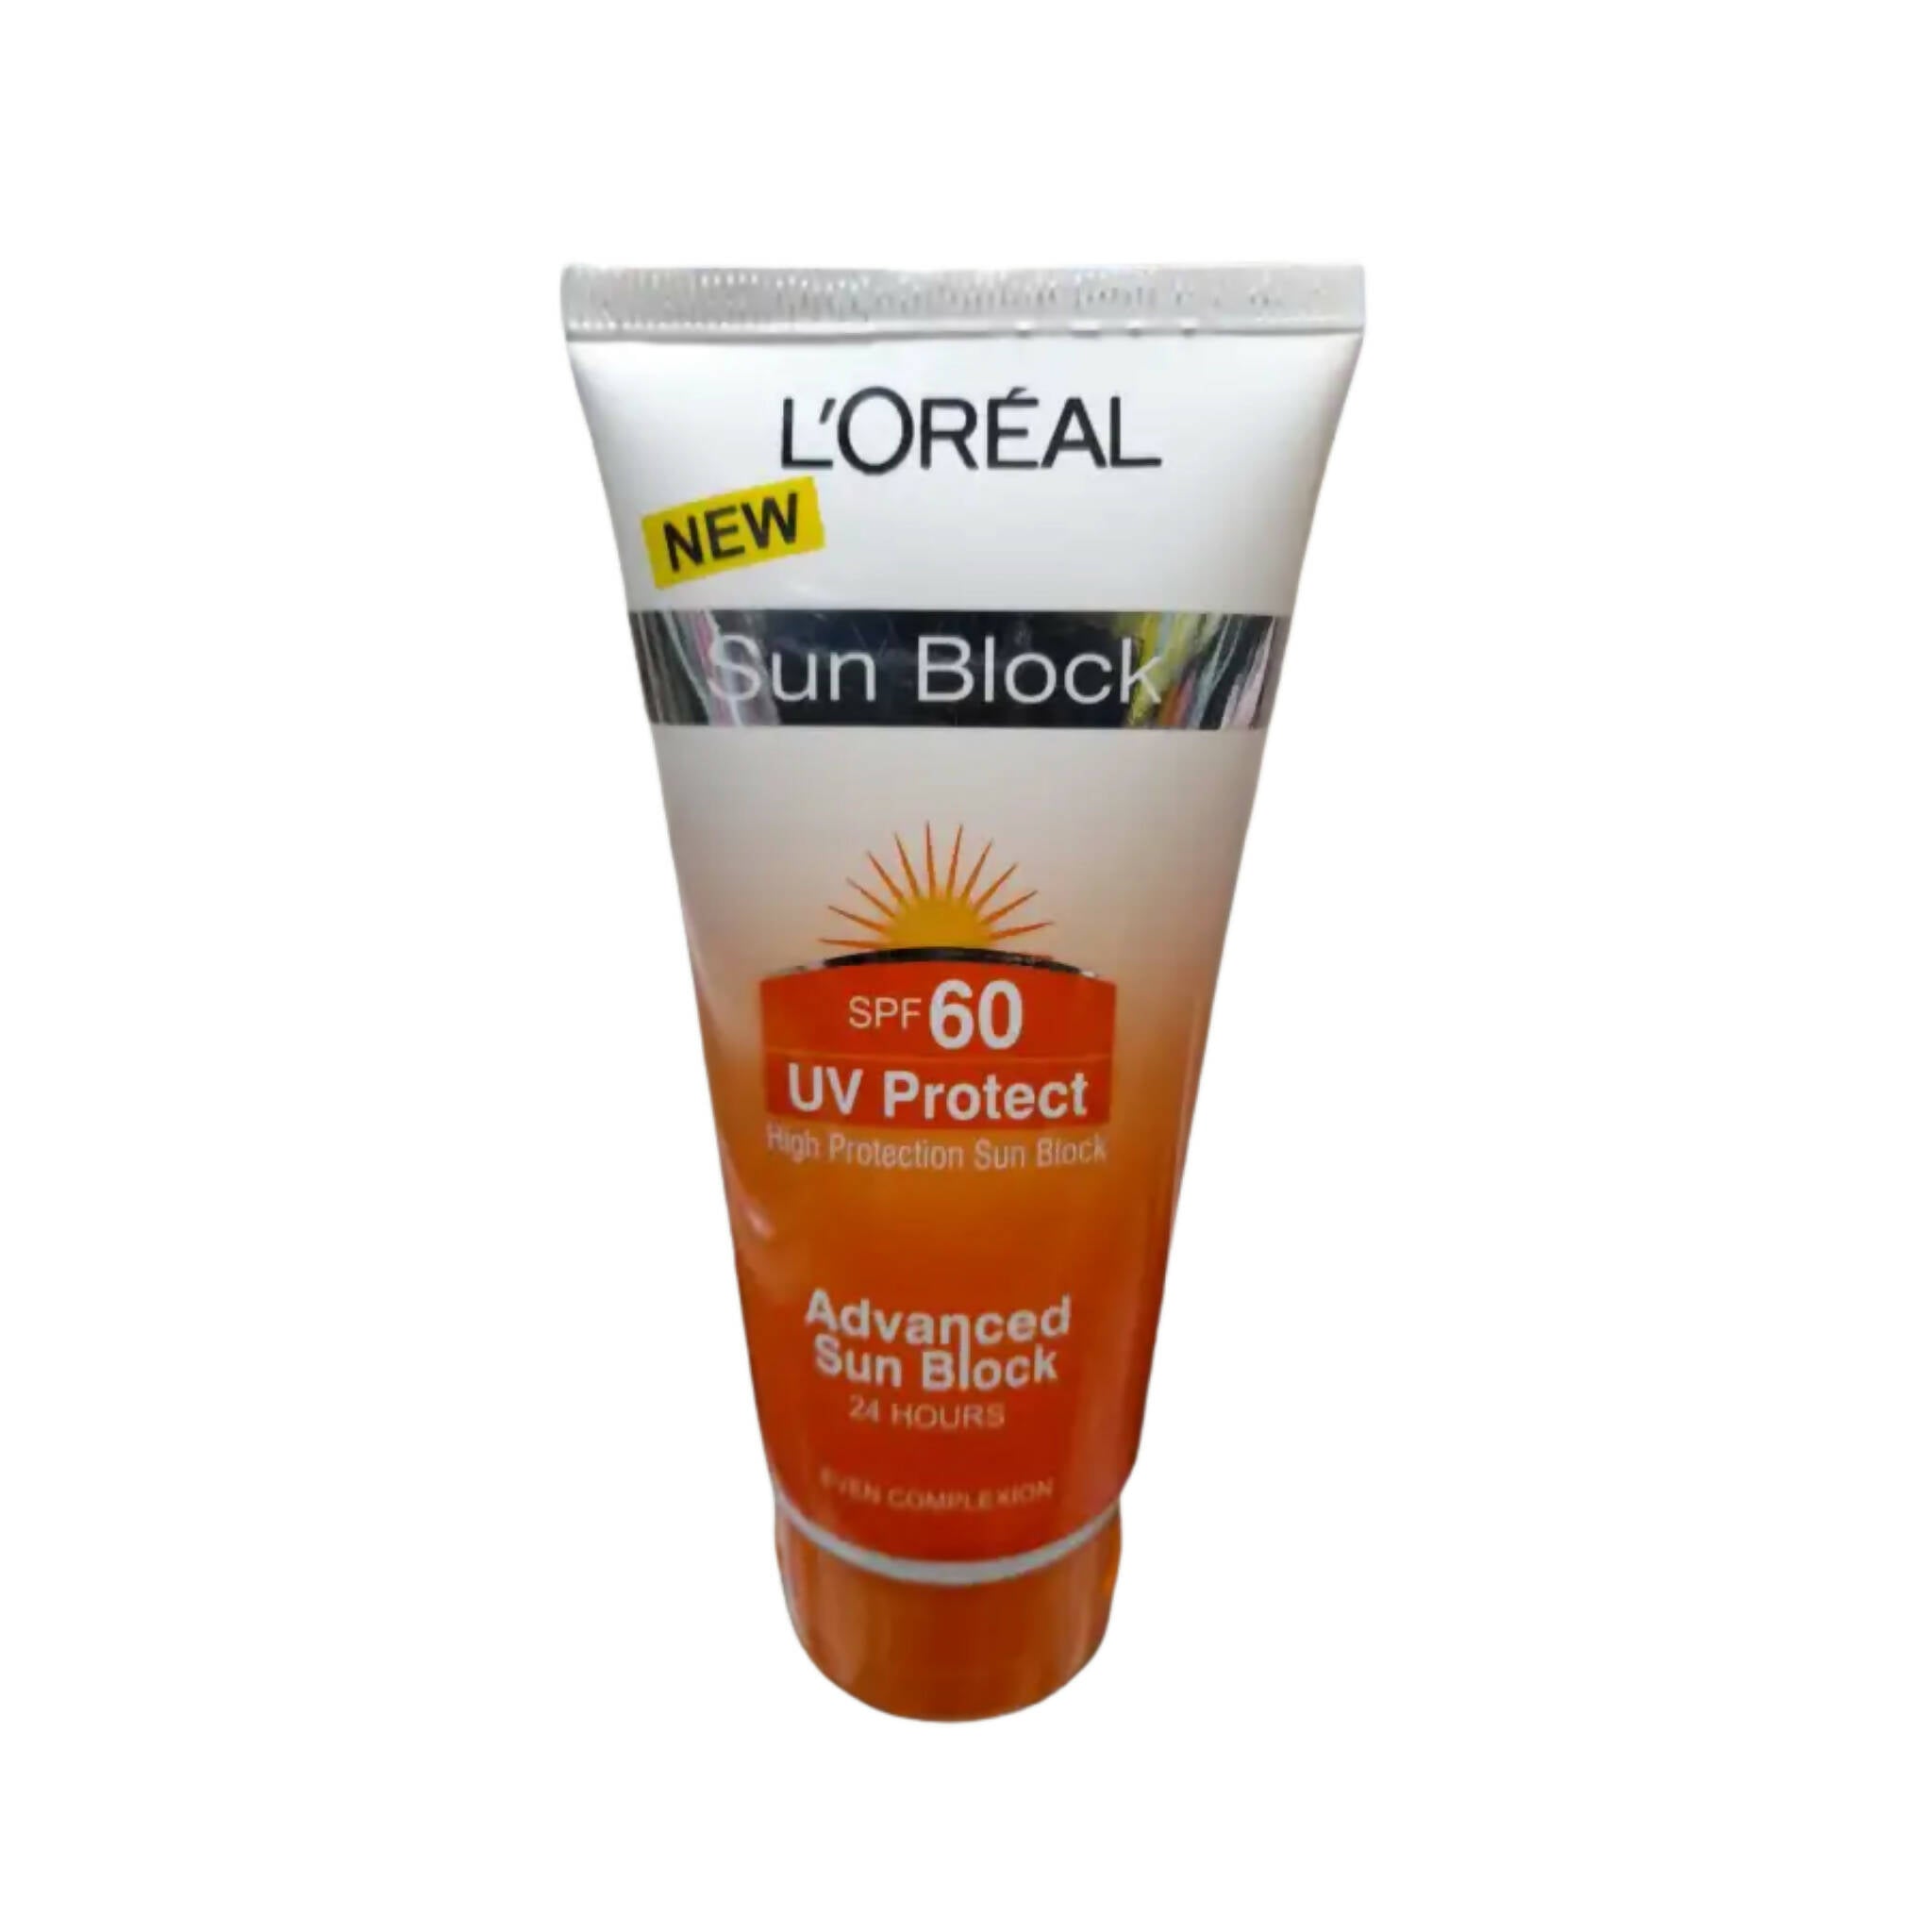 Sun Block, Flawless, White Face Sunscreen, for Any Outdoor Adventure